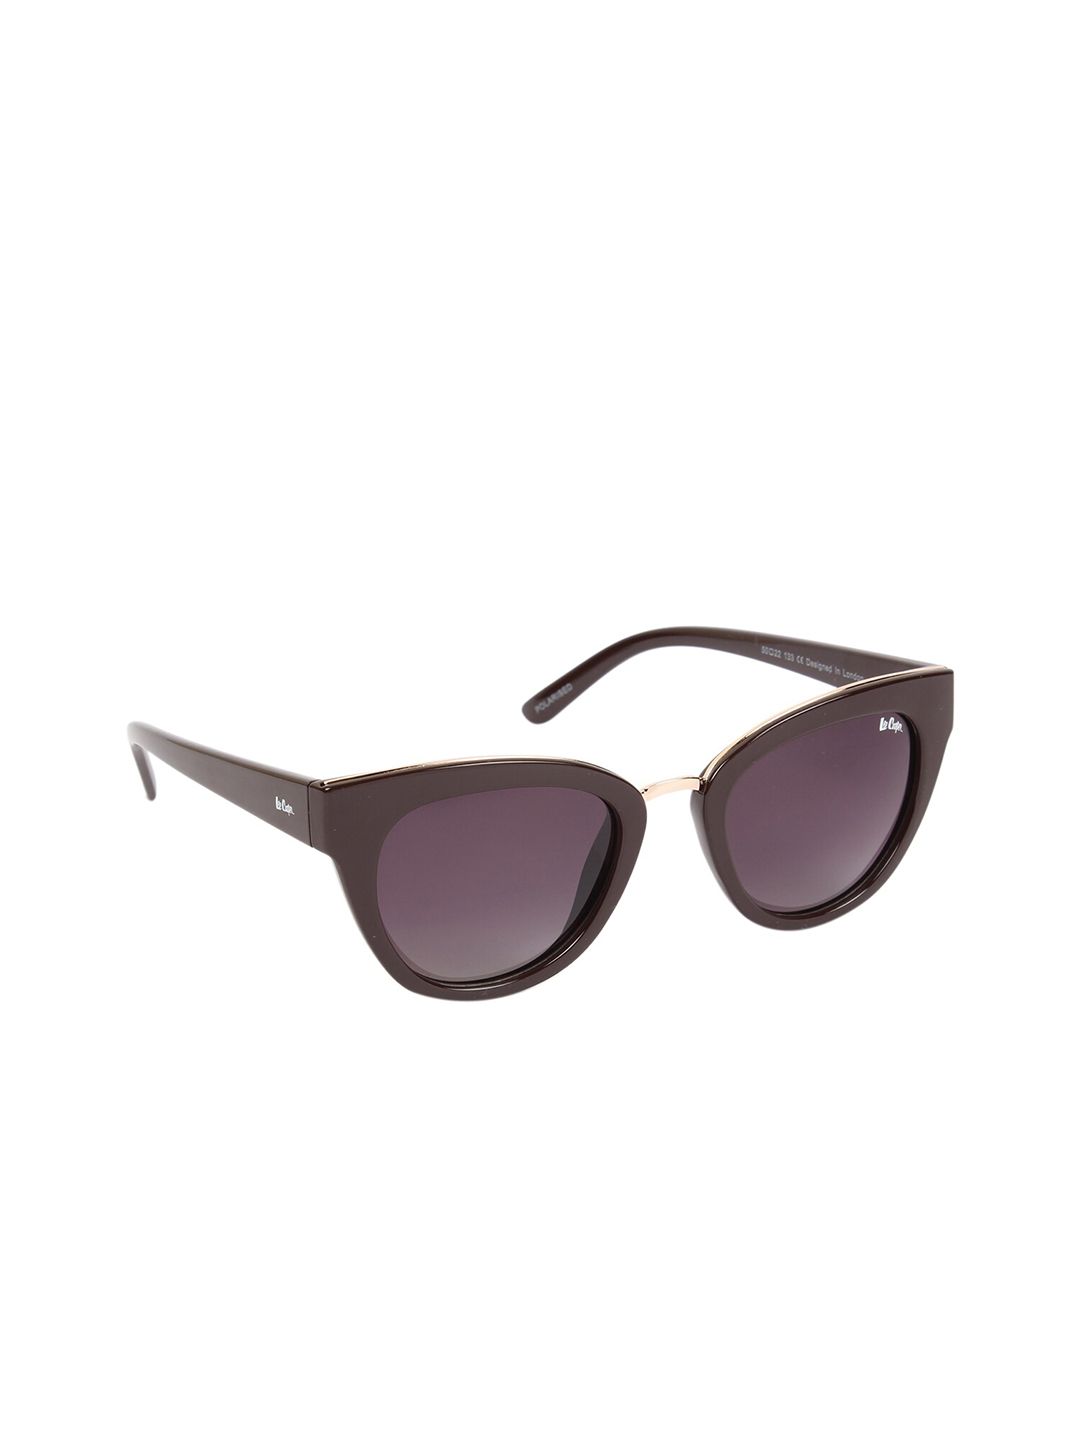 Lee Cooper Women Purple Lens & Brown Cateye Sunglasses with Polarised Lens LC9166NTBPOL Price in India